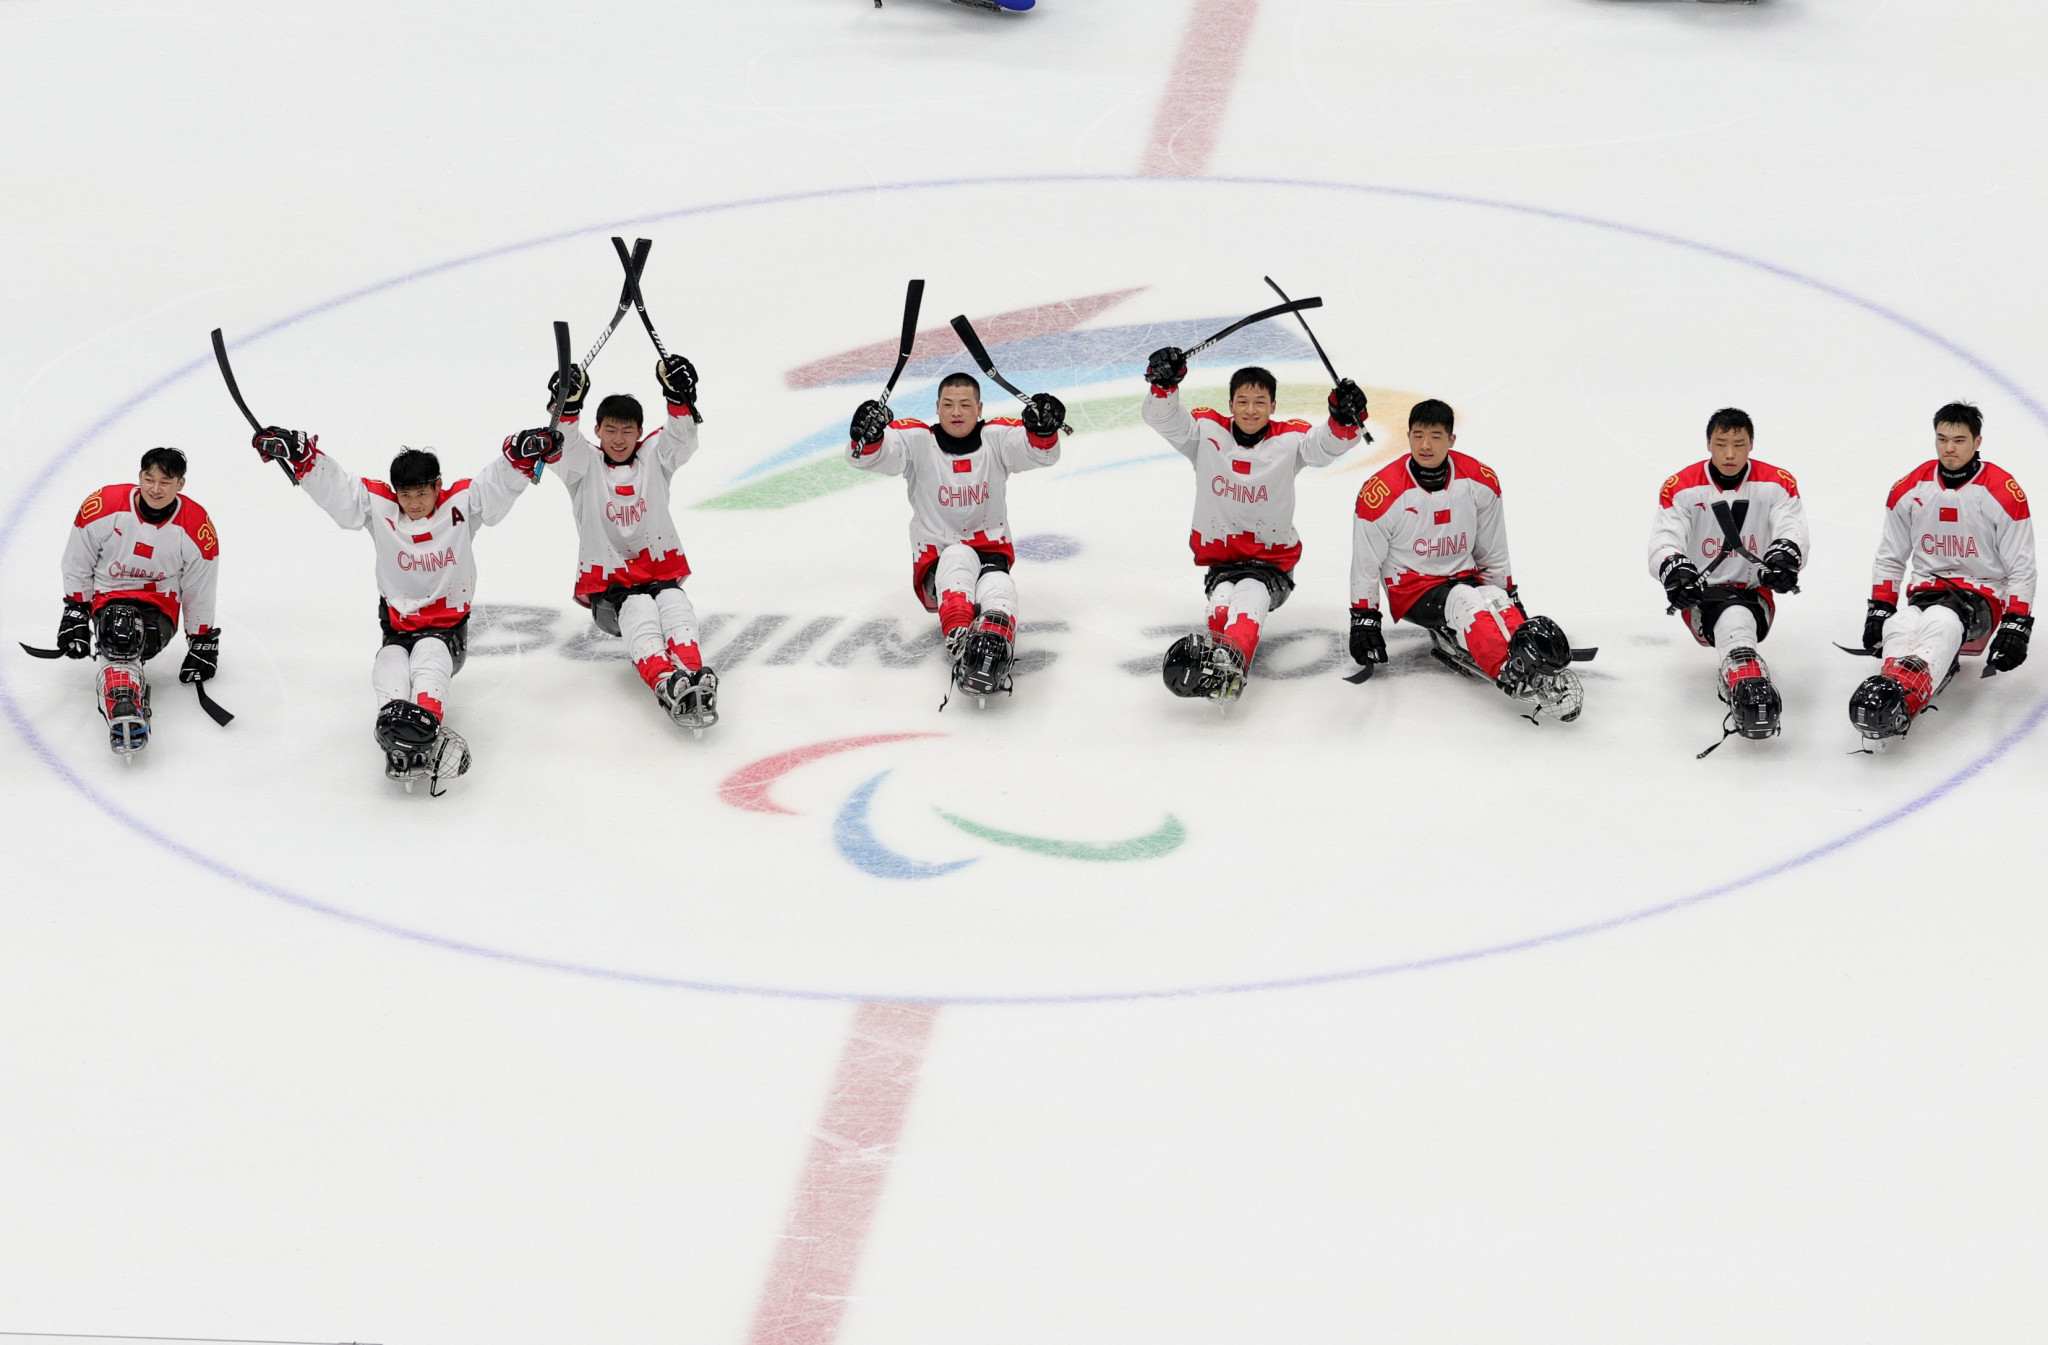 China celebrate after winning three matches out of three in the preliminary round of the ice hockey at the Beijing 2022 Winter Paralympics ©Getty Images